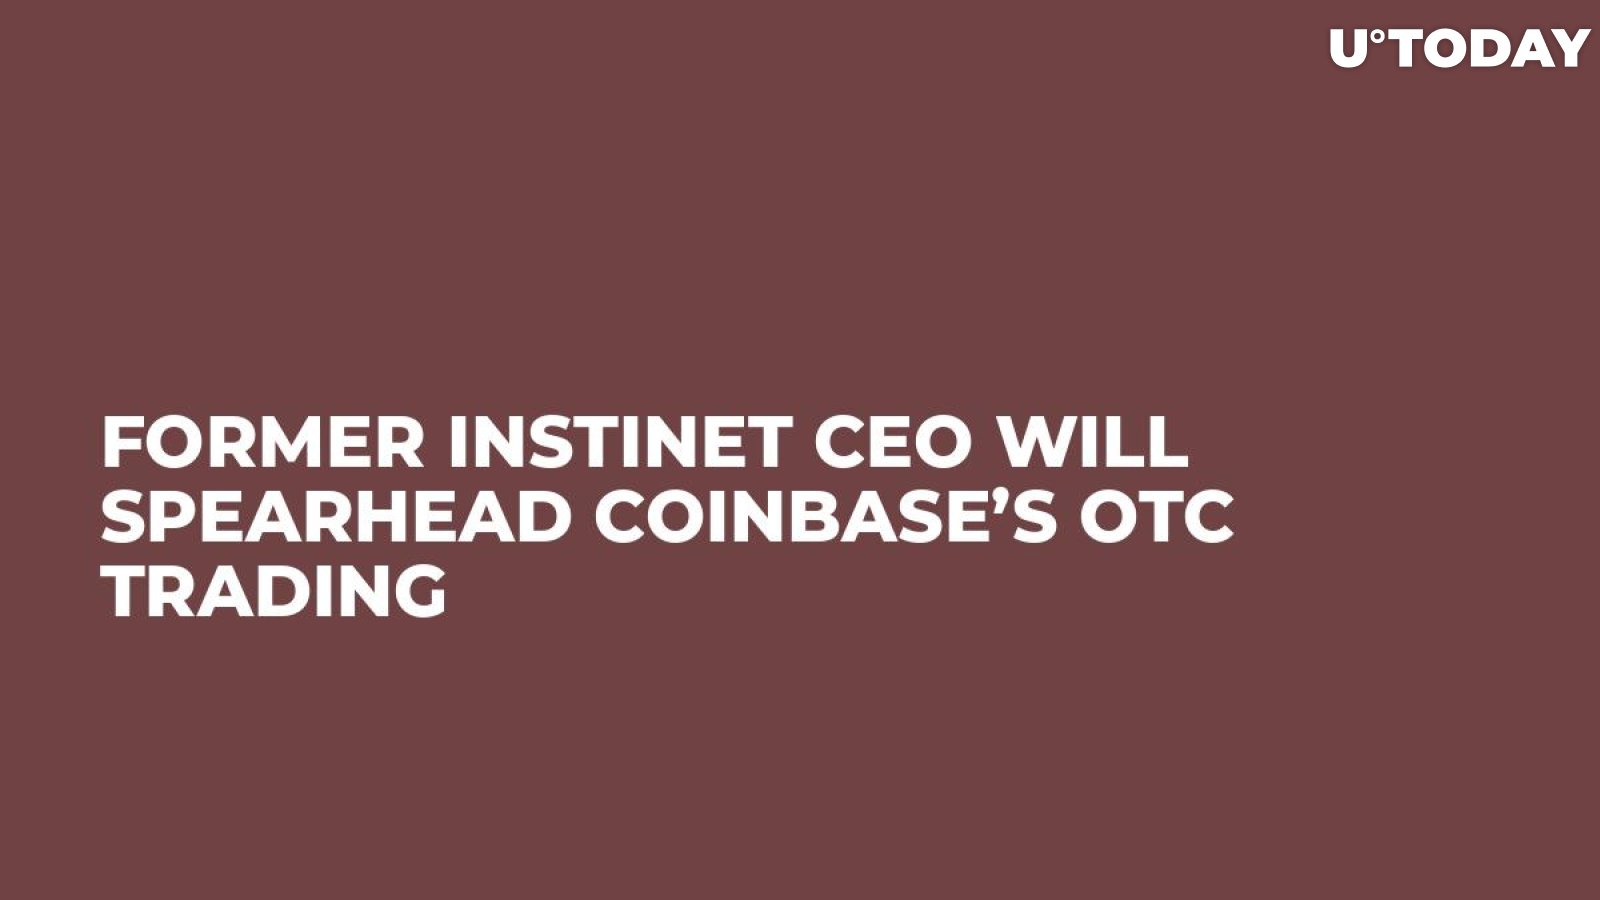 Former Instinet CEO Will Spearhead Coinbase’s OTC Trading 